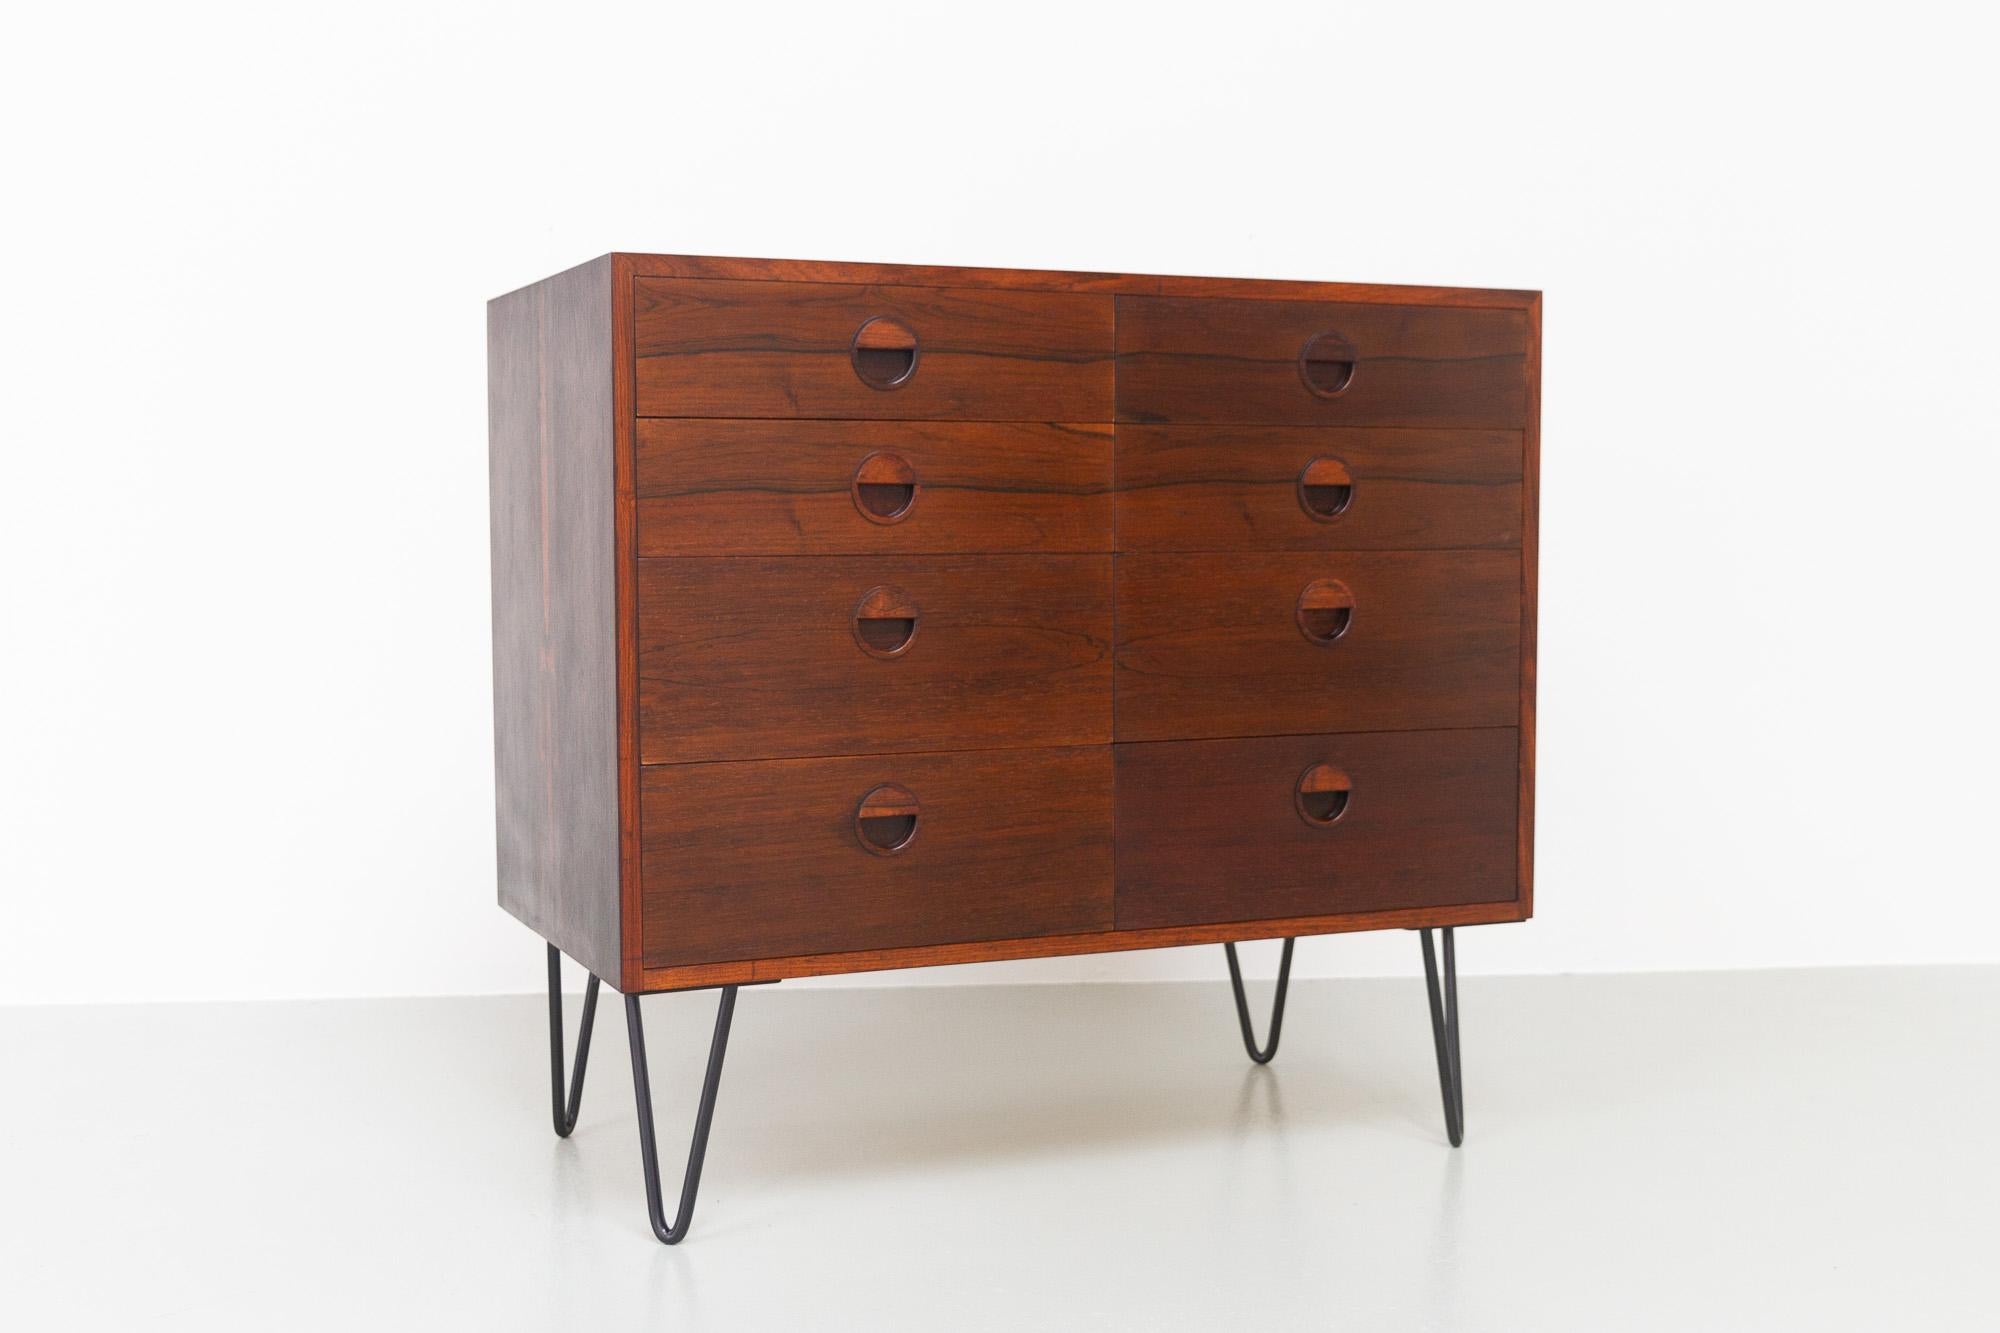 Vintage Danish rosewood chest of drawers by Johnny Sørensen and Rud Thygesen for Hansen & Guldborg Møbelfabrik, Denmark 1960s.
Scandinavian Modern dresser with eight drawers. Drawers with signature eyelid pulls in solid Rosewood and half blind